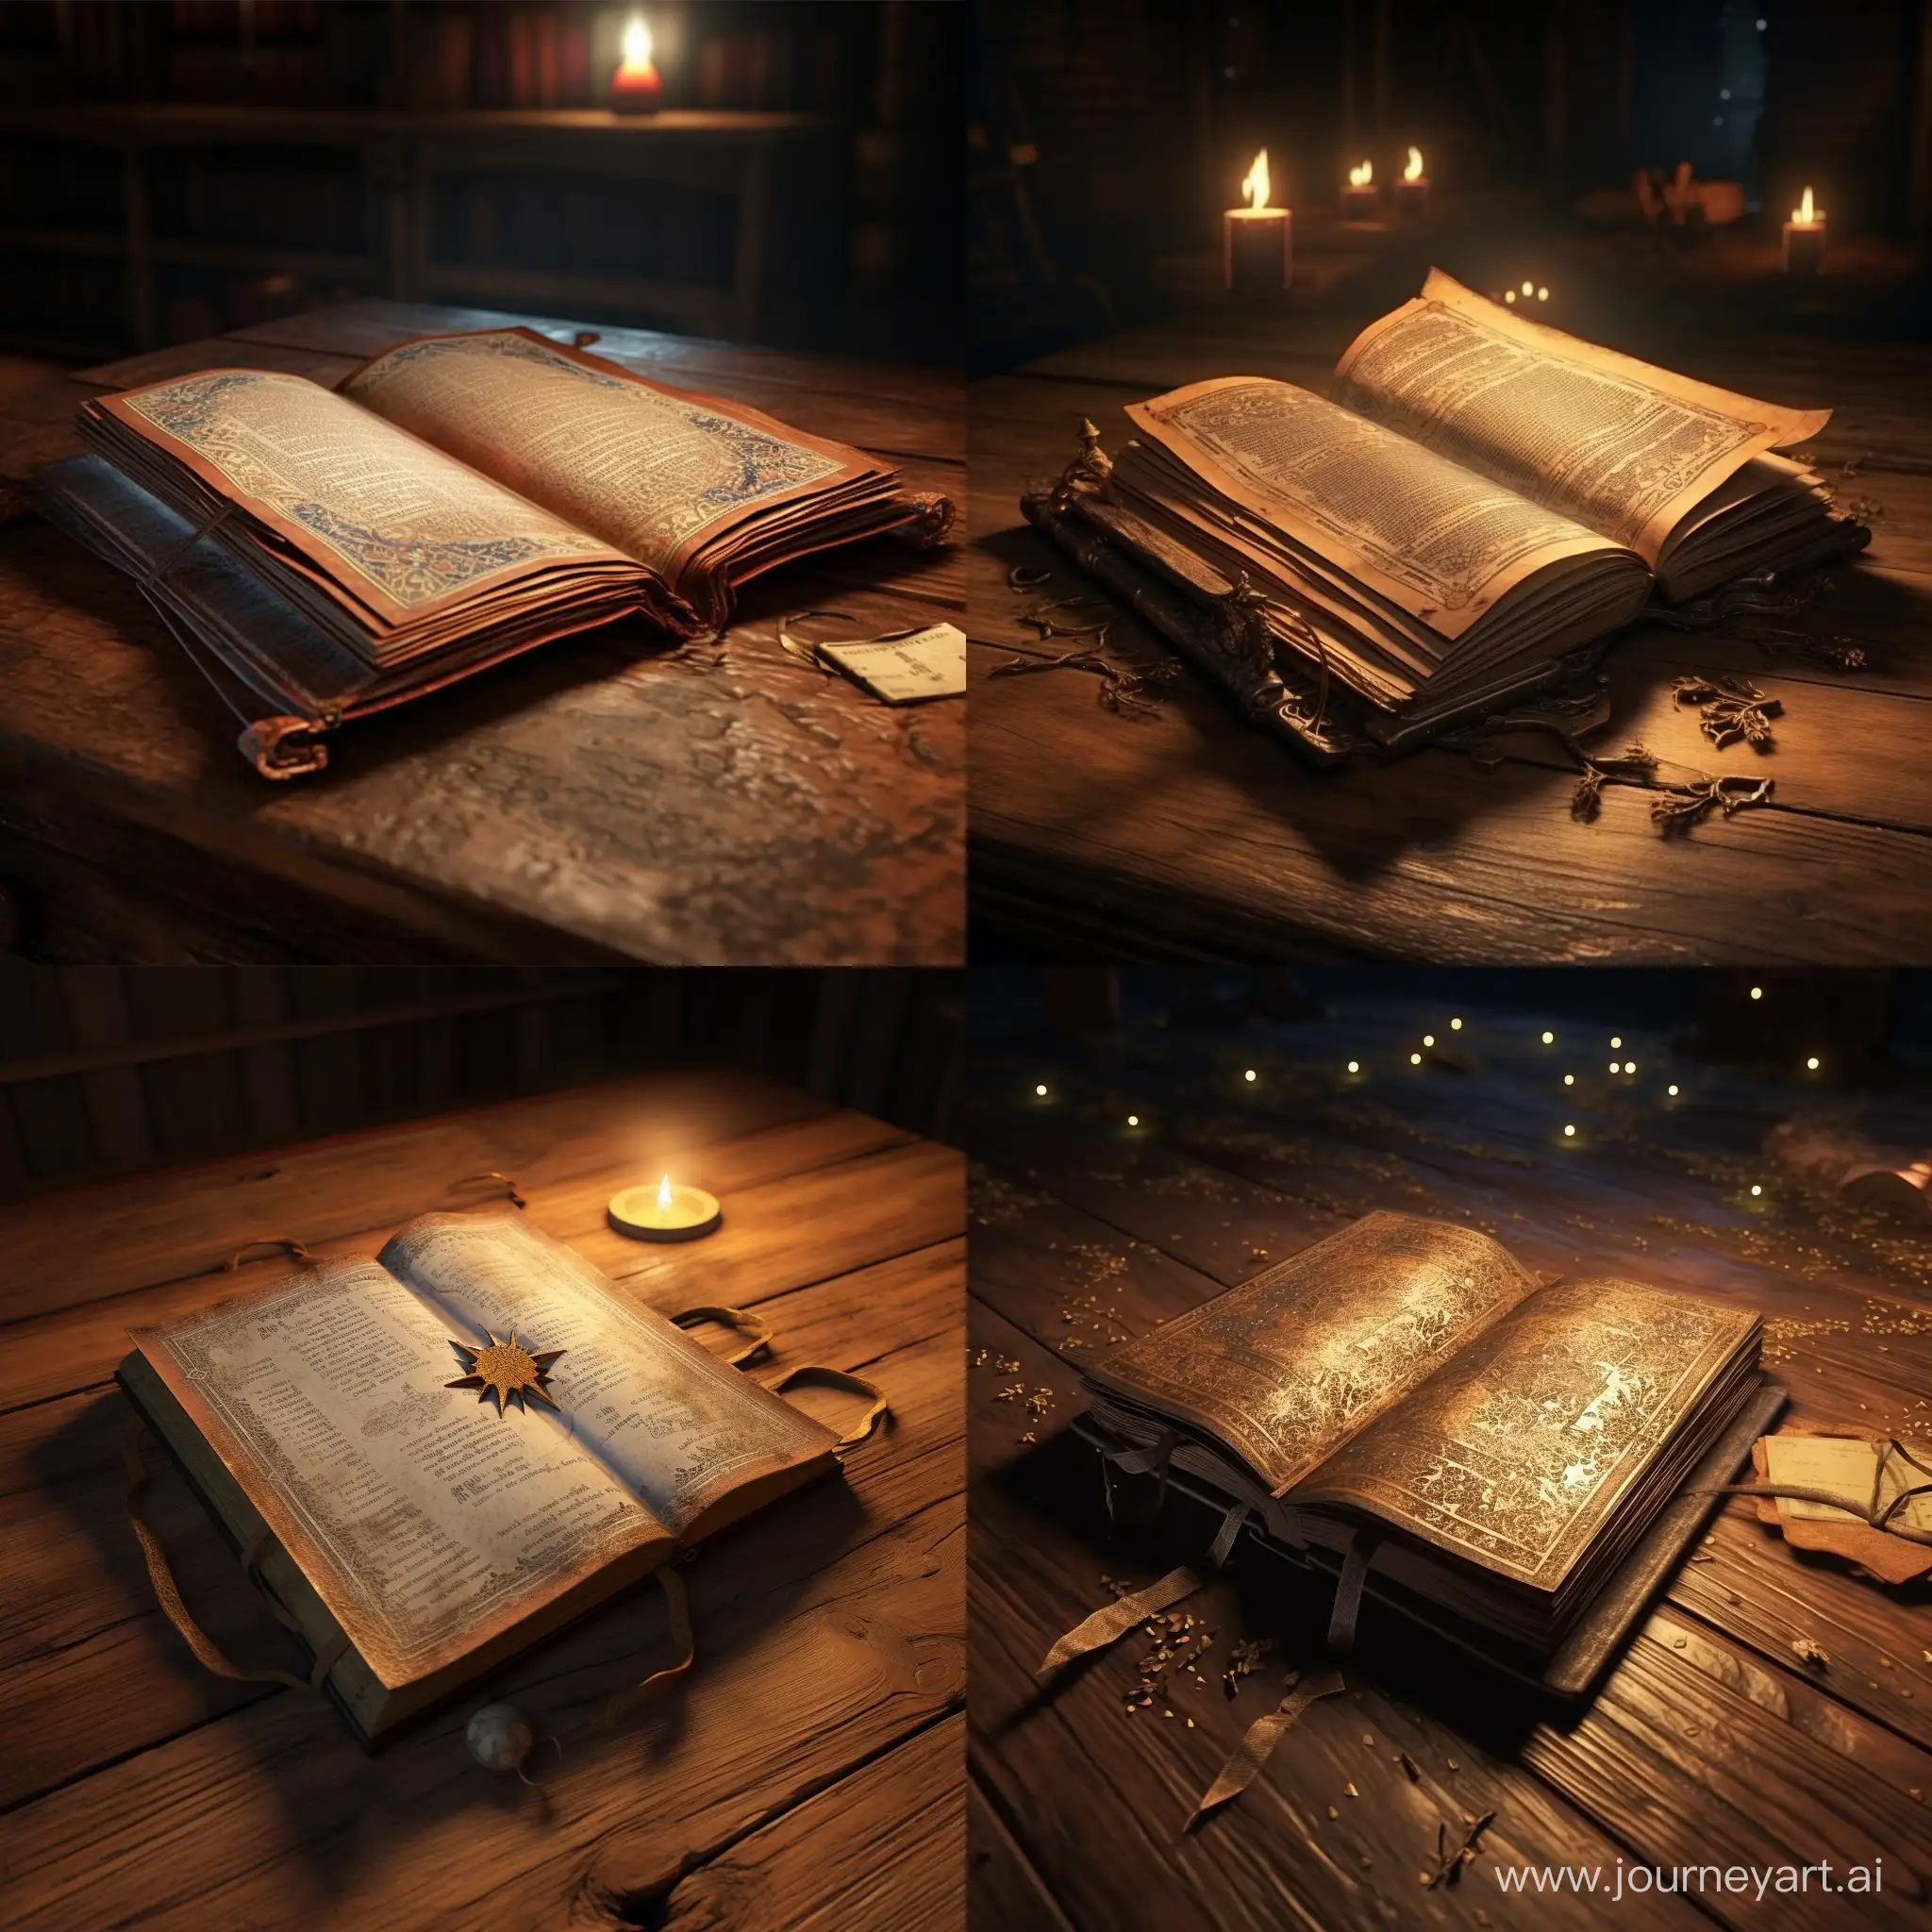 Enchanting-3D-Animation-of-an-Ancient-Book-Unfolded-on-a-Wooden-Table